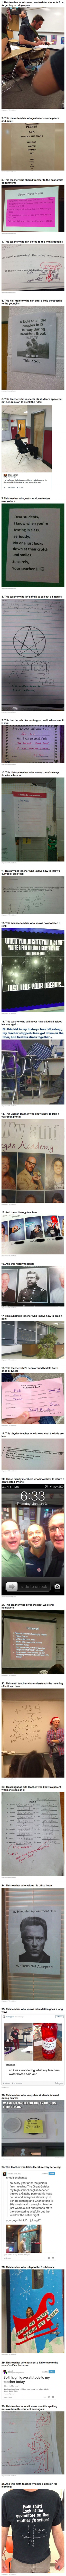 31 Times The Teachers And Schools Were Awesome